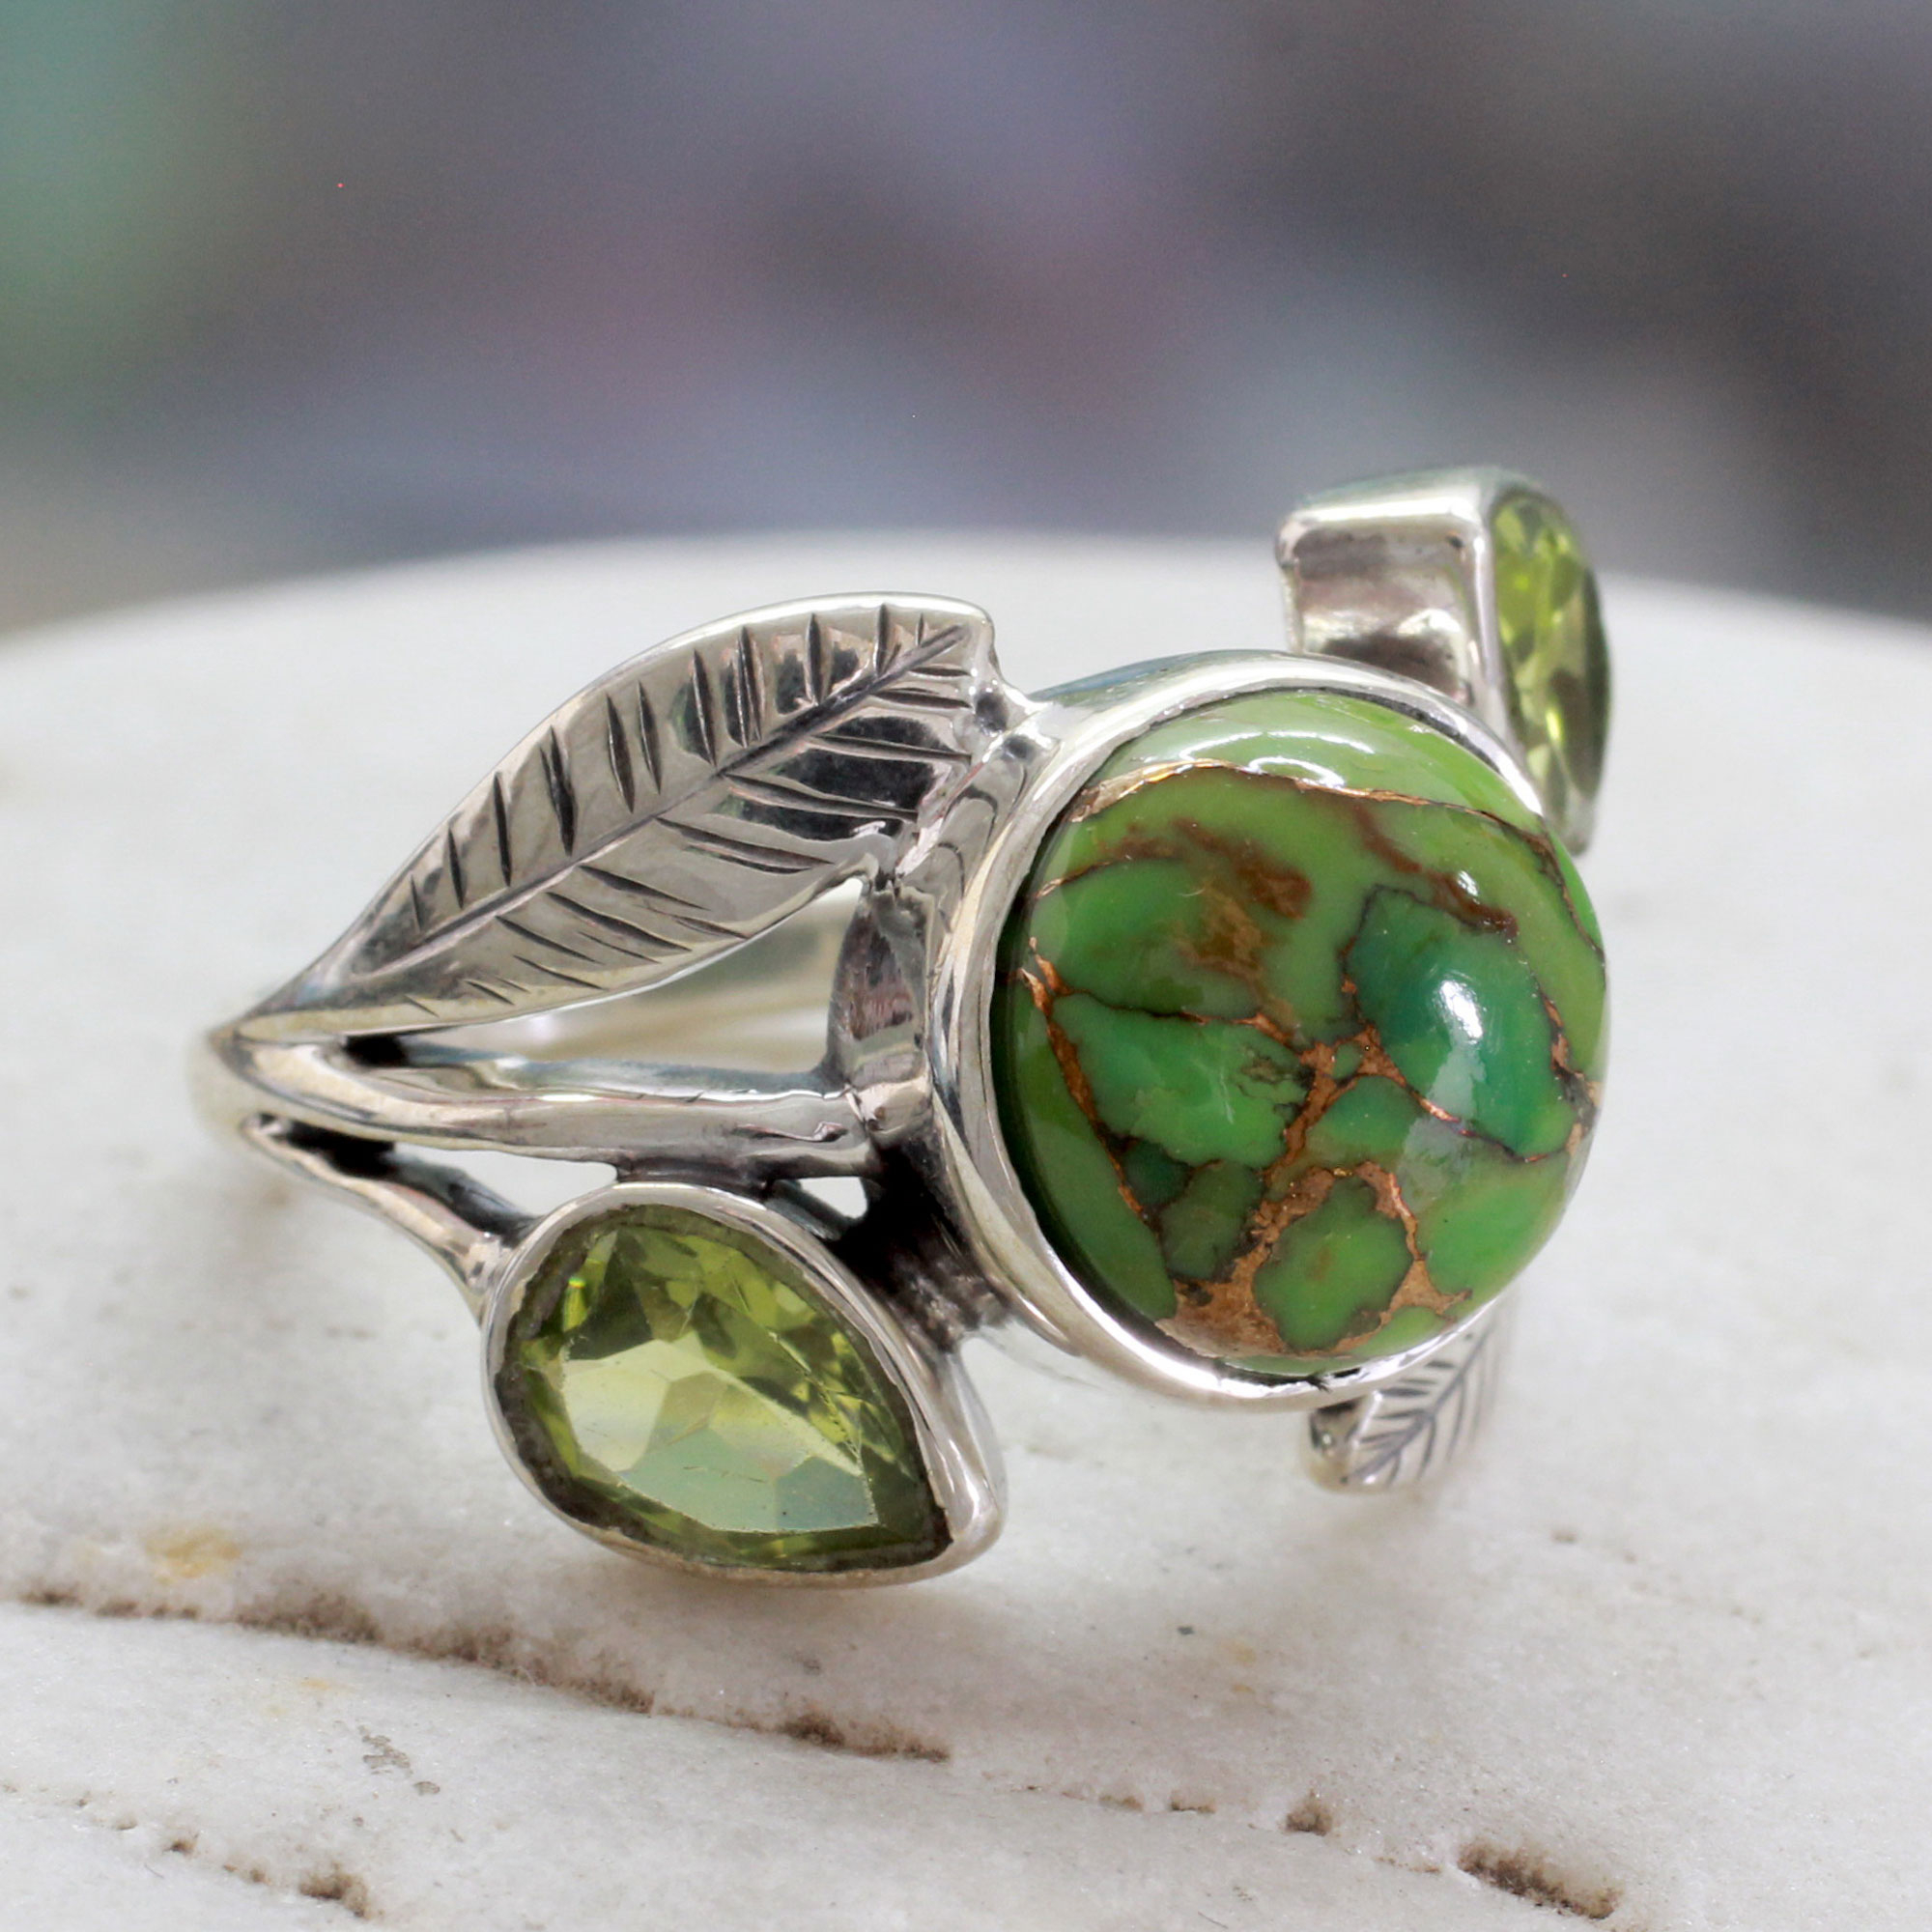 Handmade Peridot Ring with Composite Turquoise - Green Ivy | NOVICA